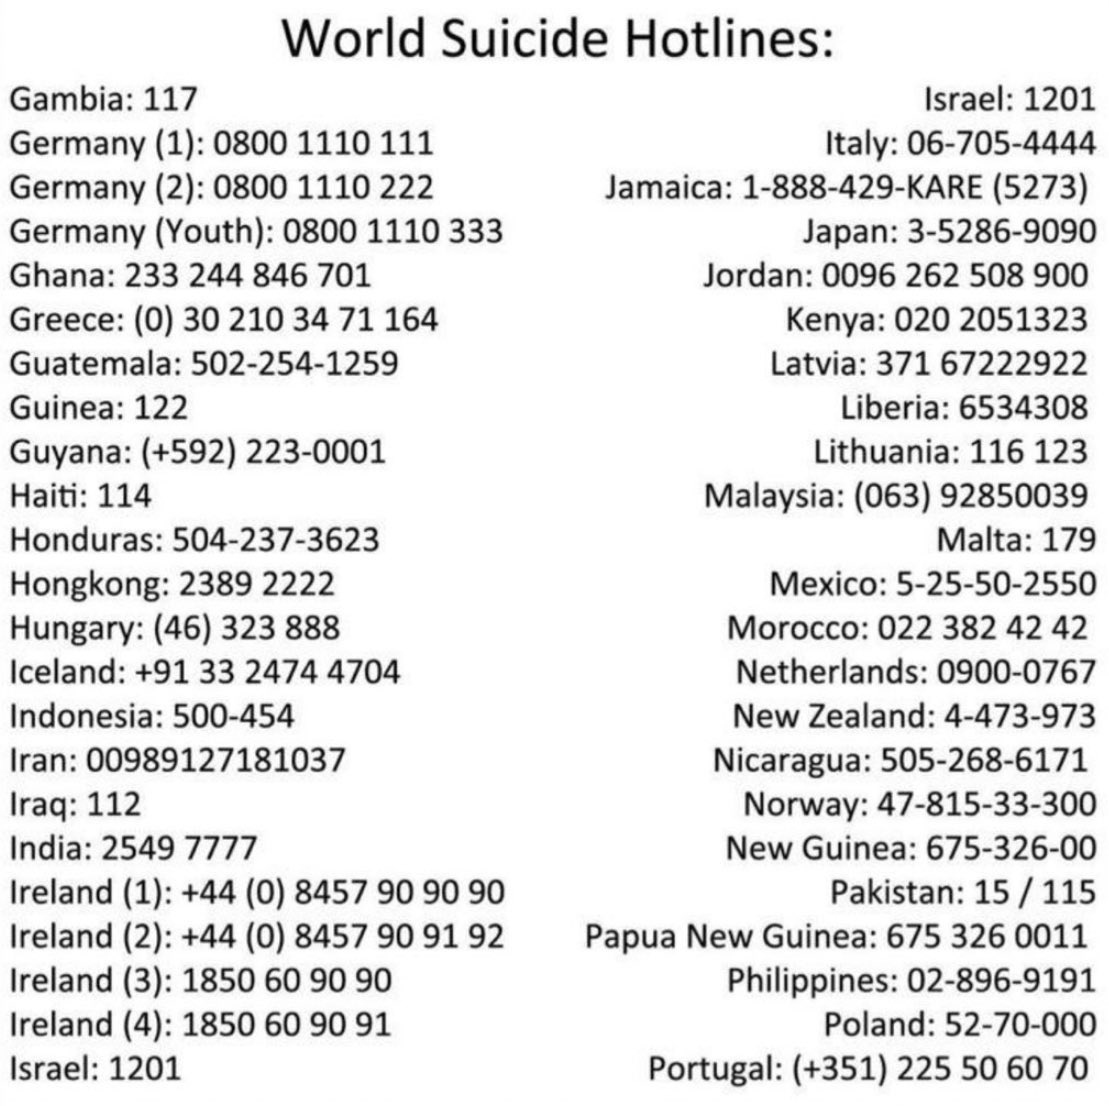 i am glad that many people are seeing this. i didn't put every single thing to say/not say, but i am pretty sure you got the message.if you're scared to seek professional help, it's ok! you can talk to a friend or dm me! here are suicide hotlines for all around the world.